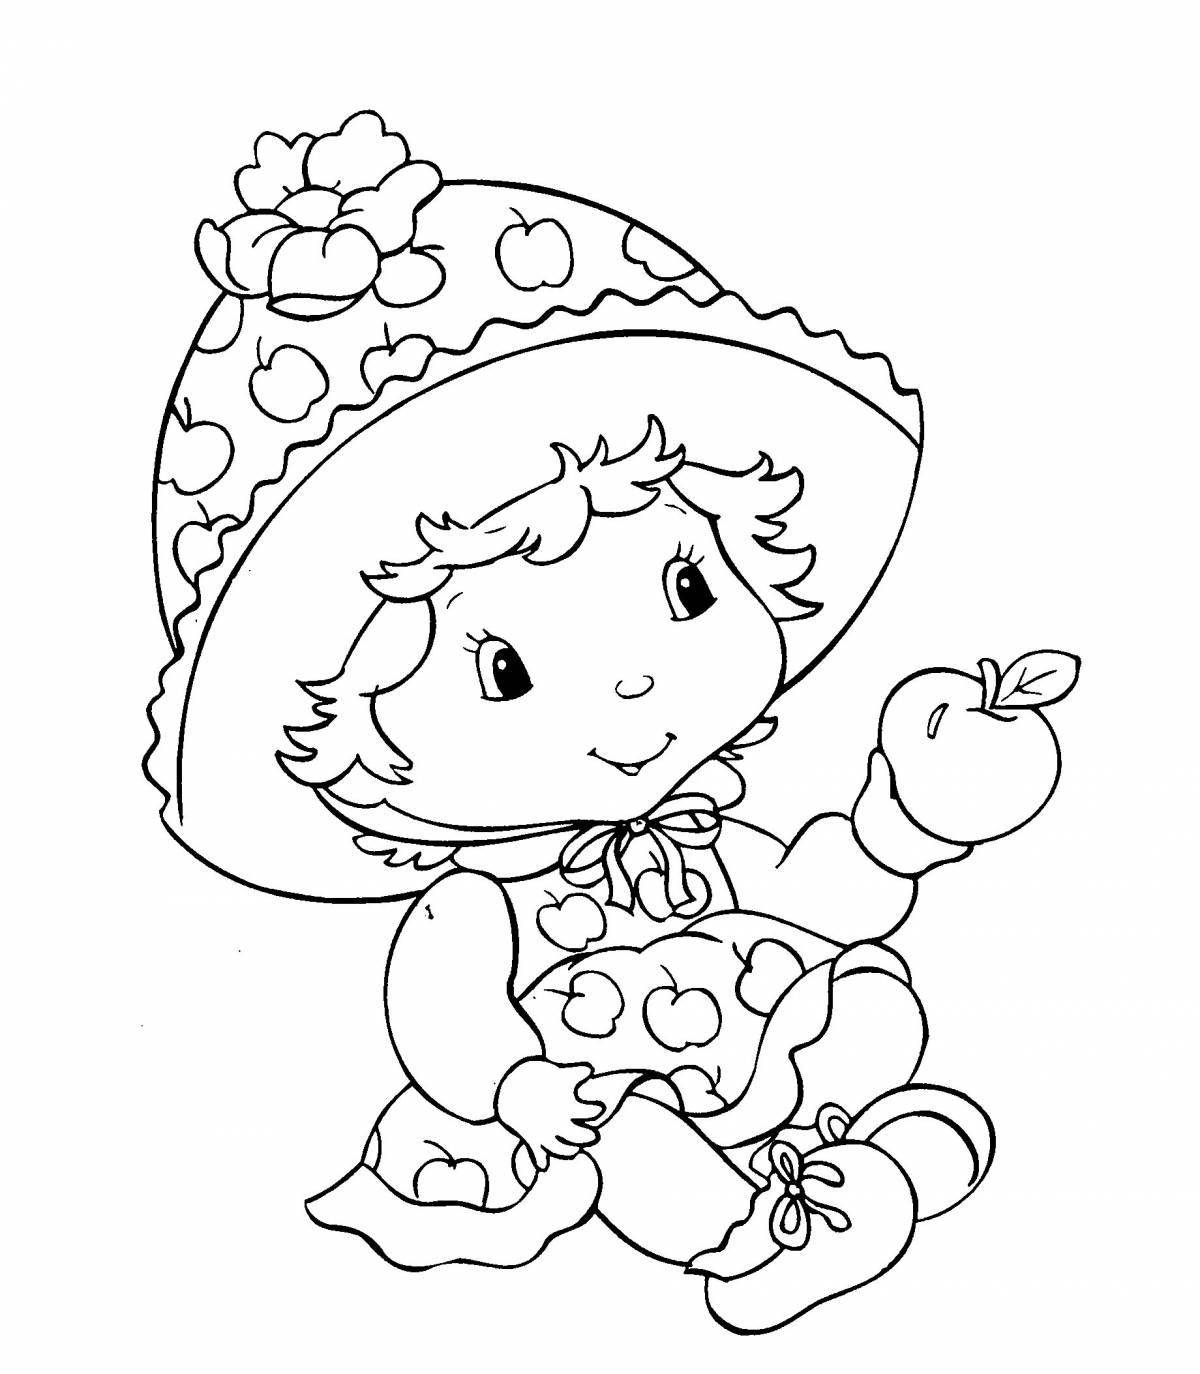 Creative coloring book for toddler girls